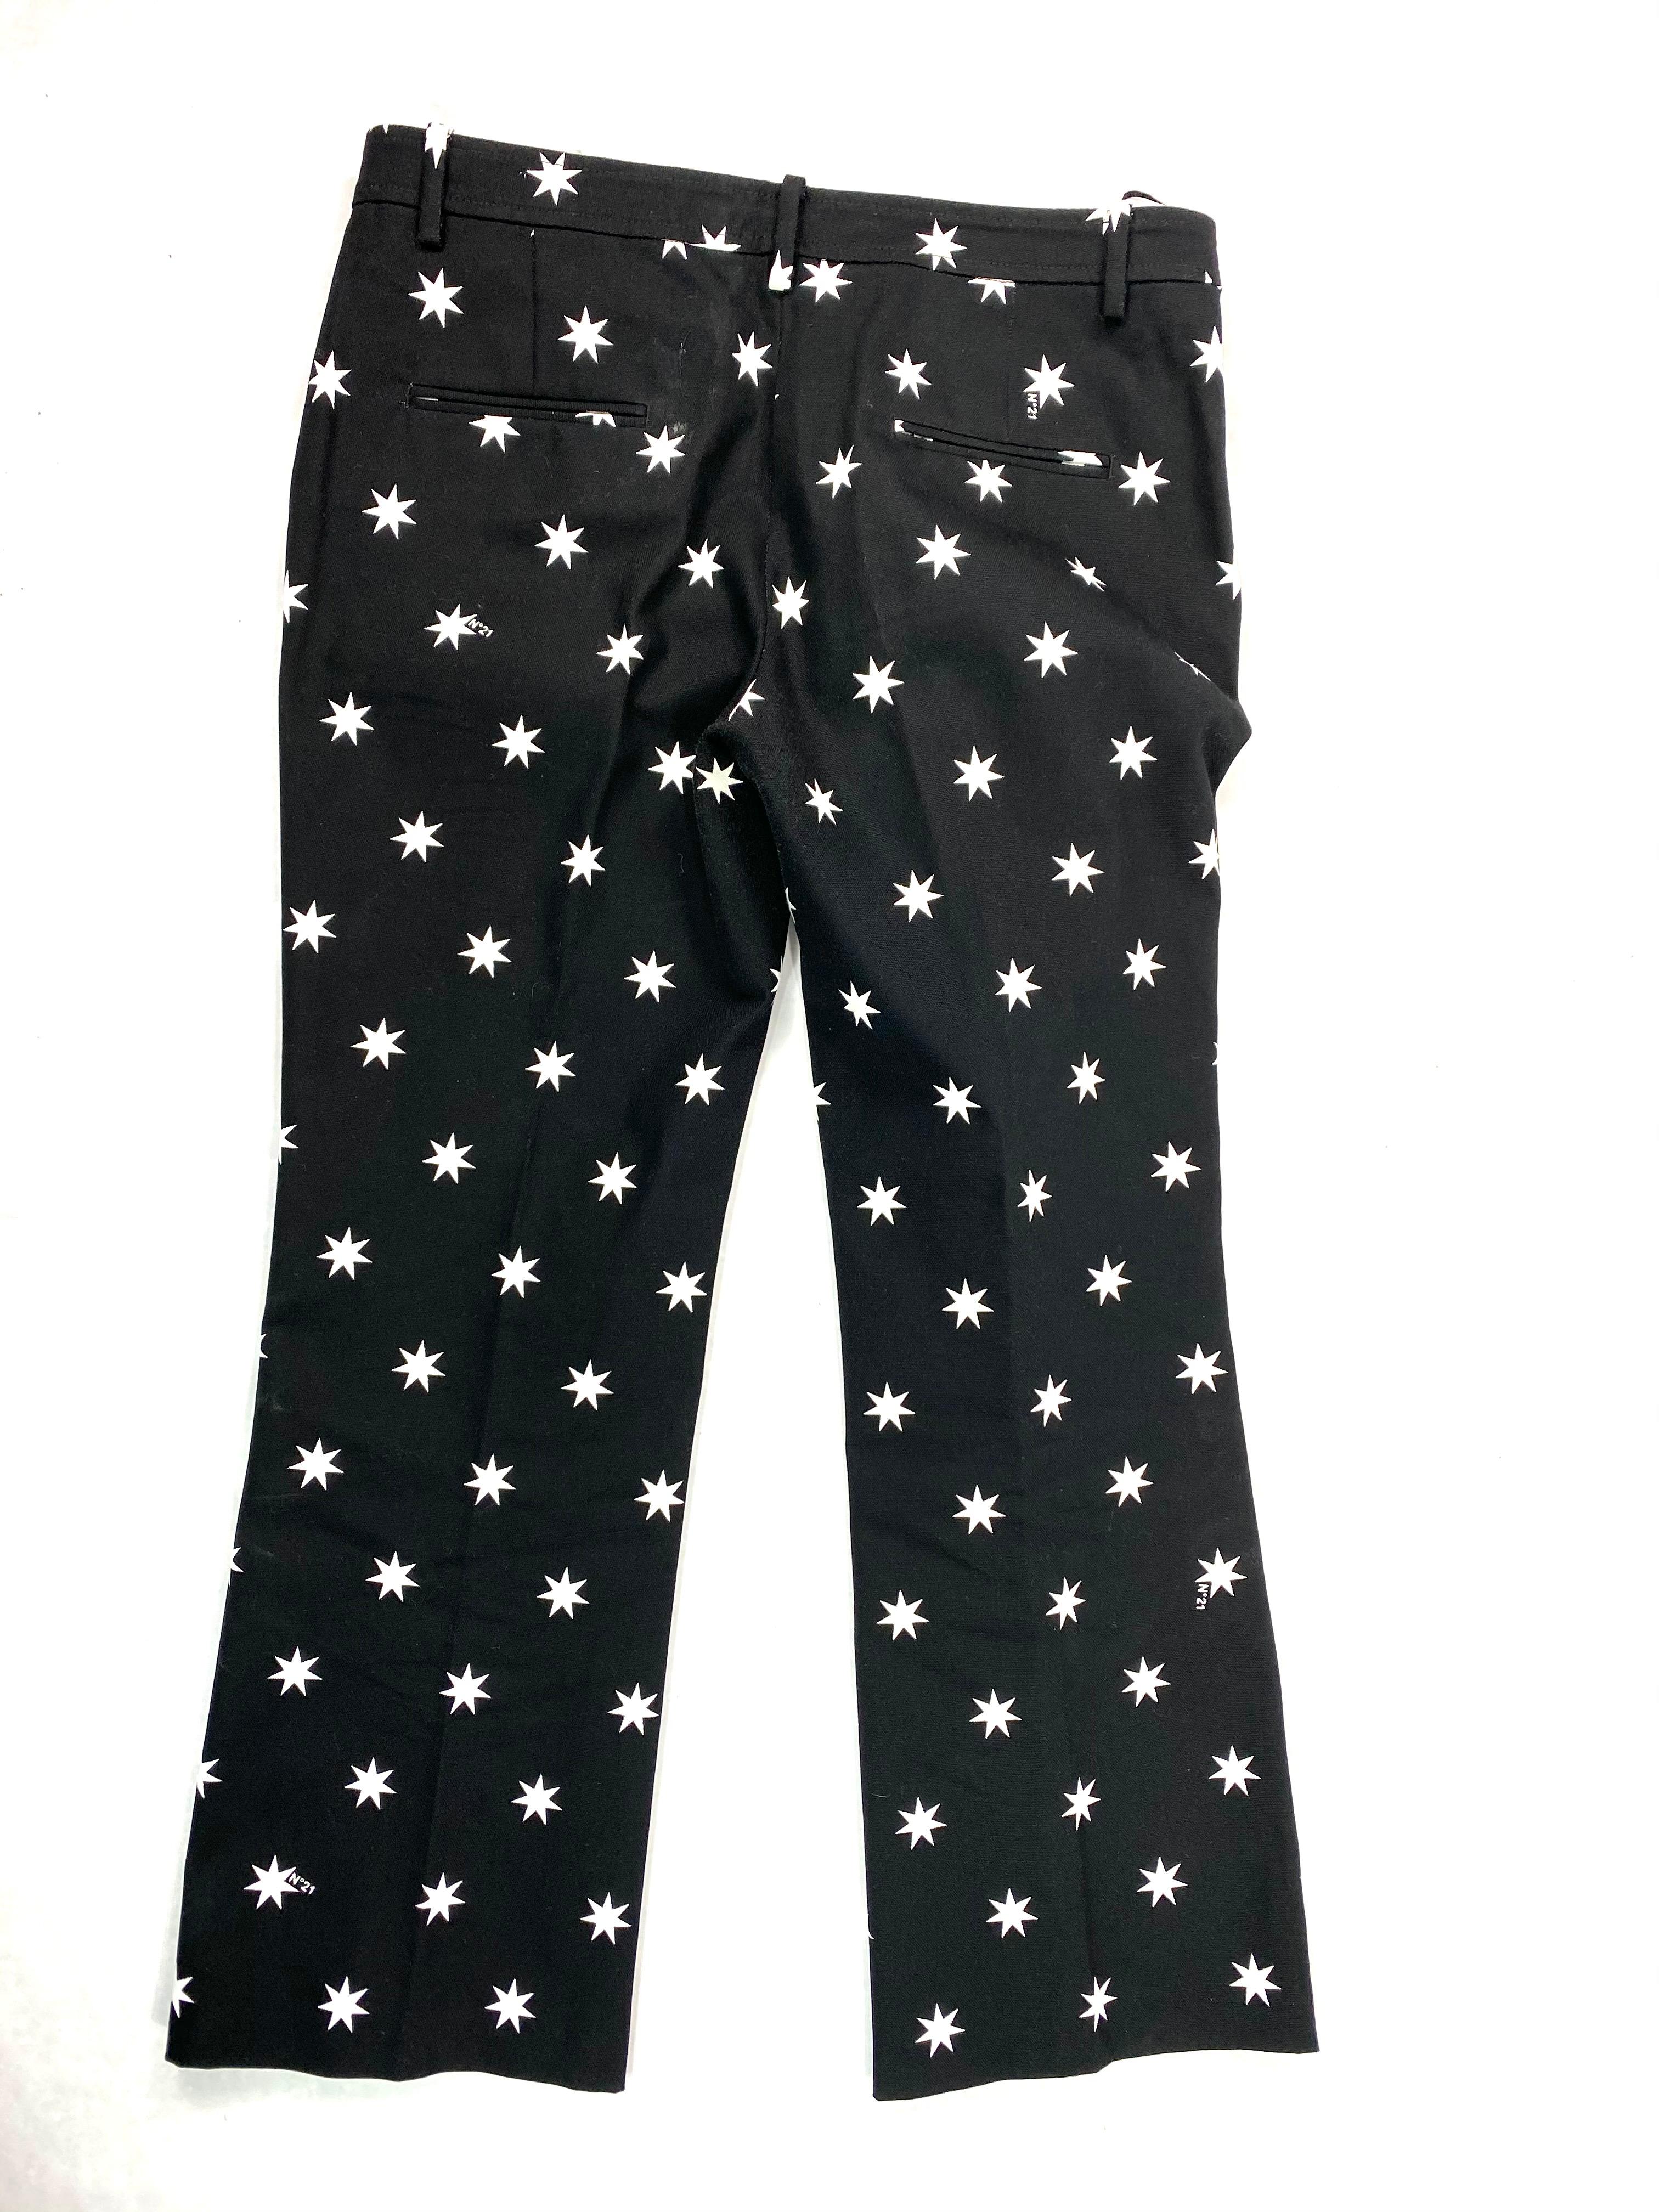 NO. 21 Black and White Cotton Star Pants, Size 44 In Excellent Condition For Sale In Beverly Hills, CA